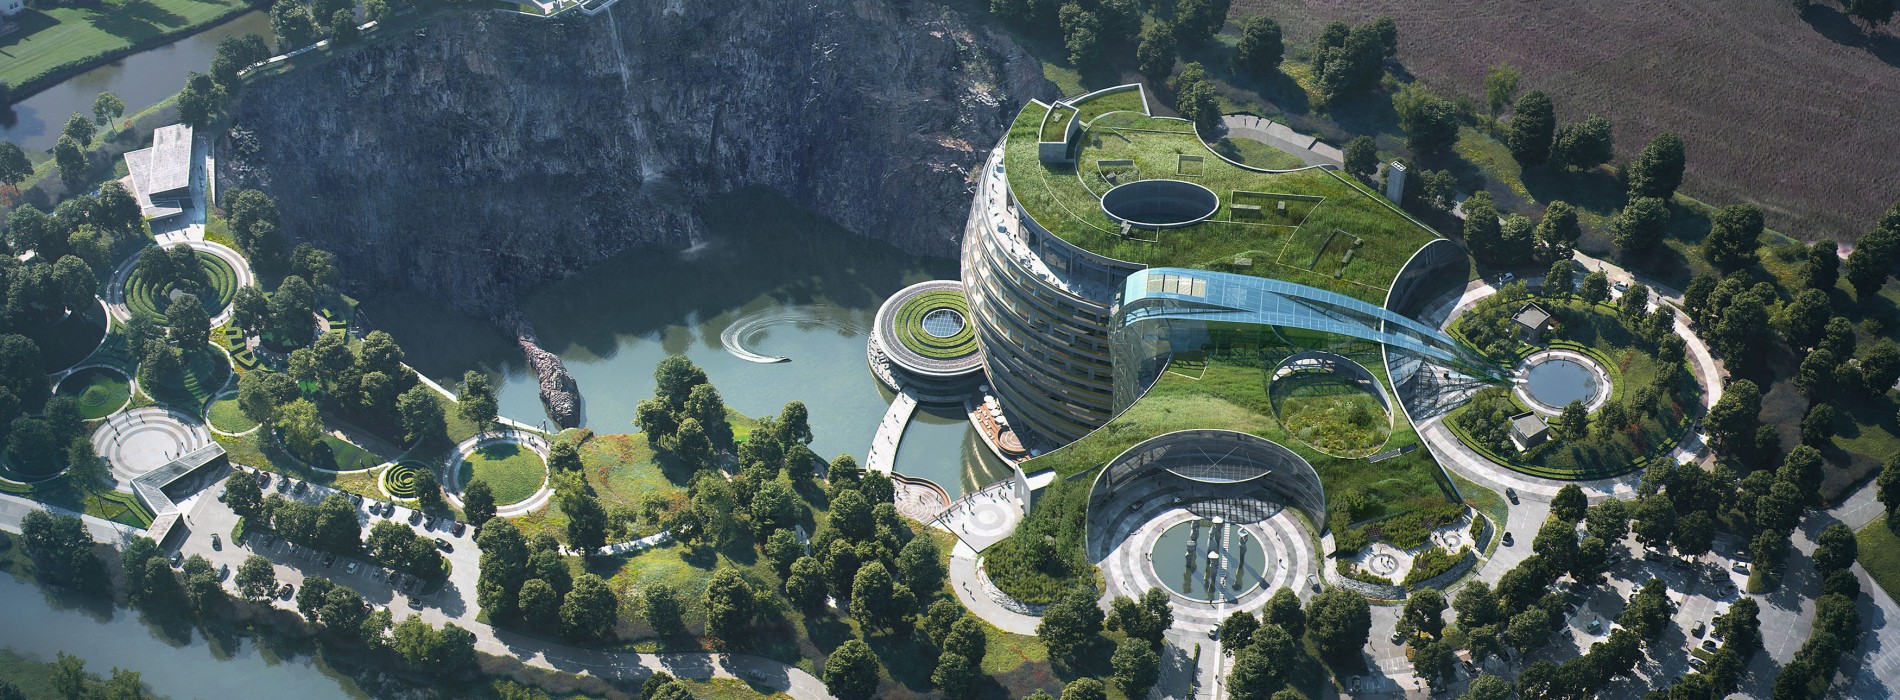 InterContinental Shanghai Wonderland to open in the fourth quarter of 2018